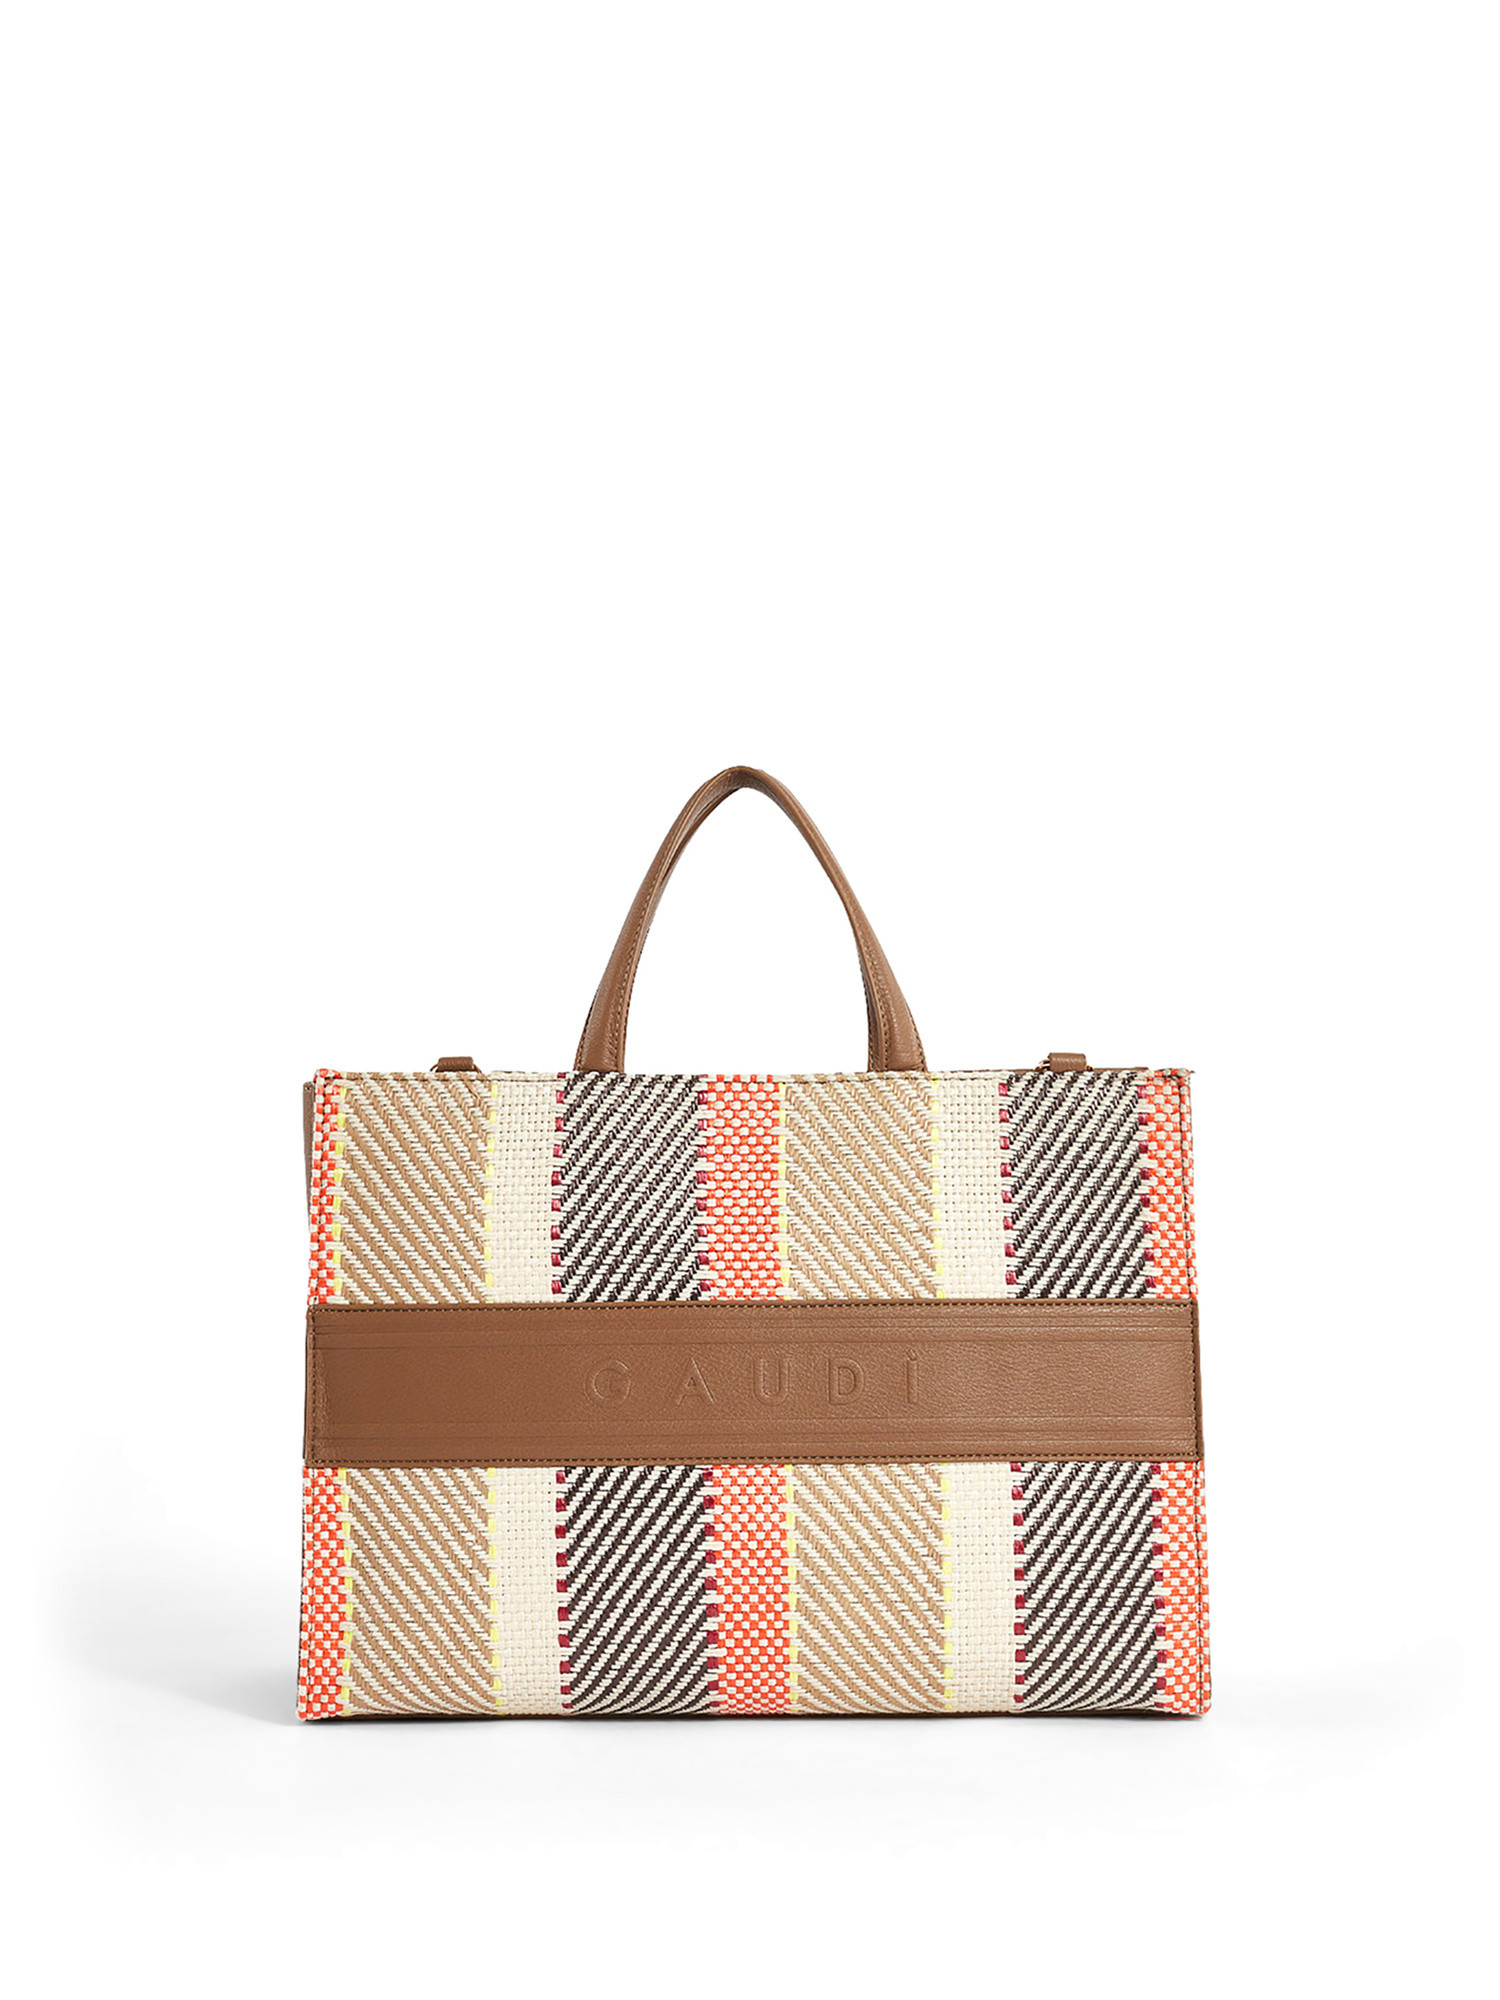 Gaudì - Shopping bag in raffia and imitation leather, Camel, large image number 1